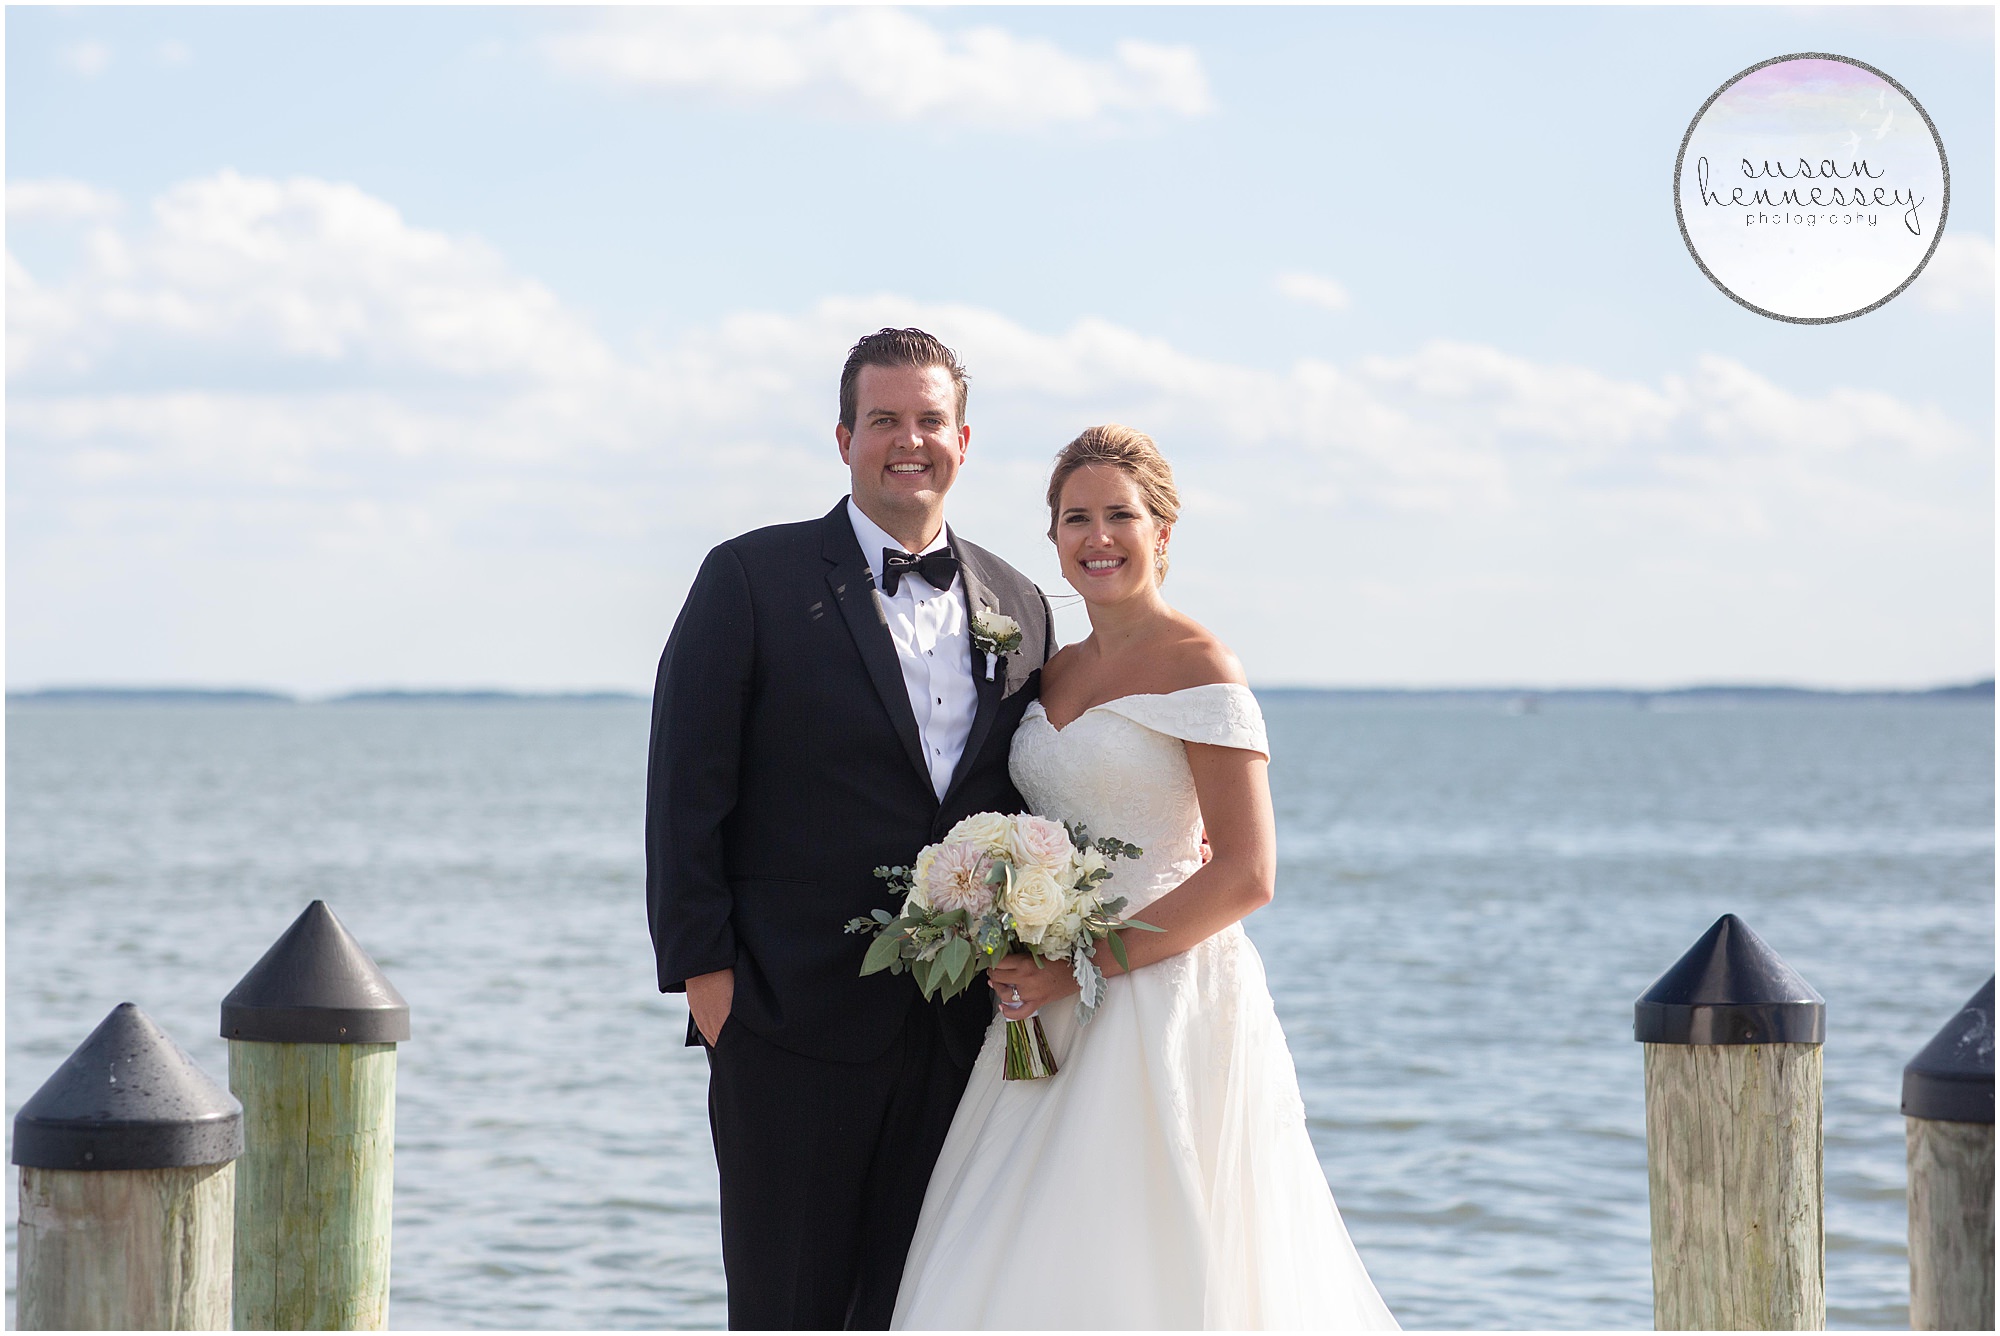 Waterfront portraits on sunny wedding day